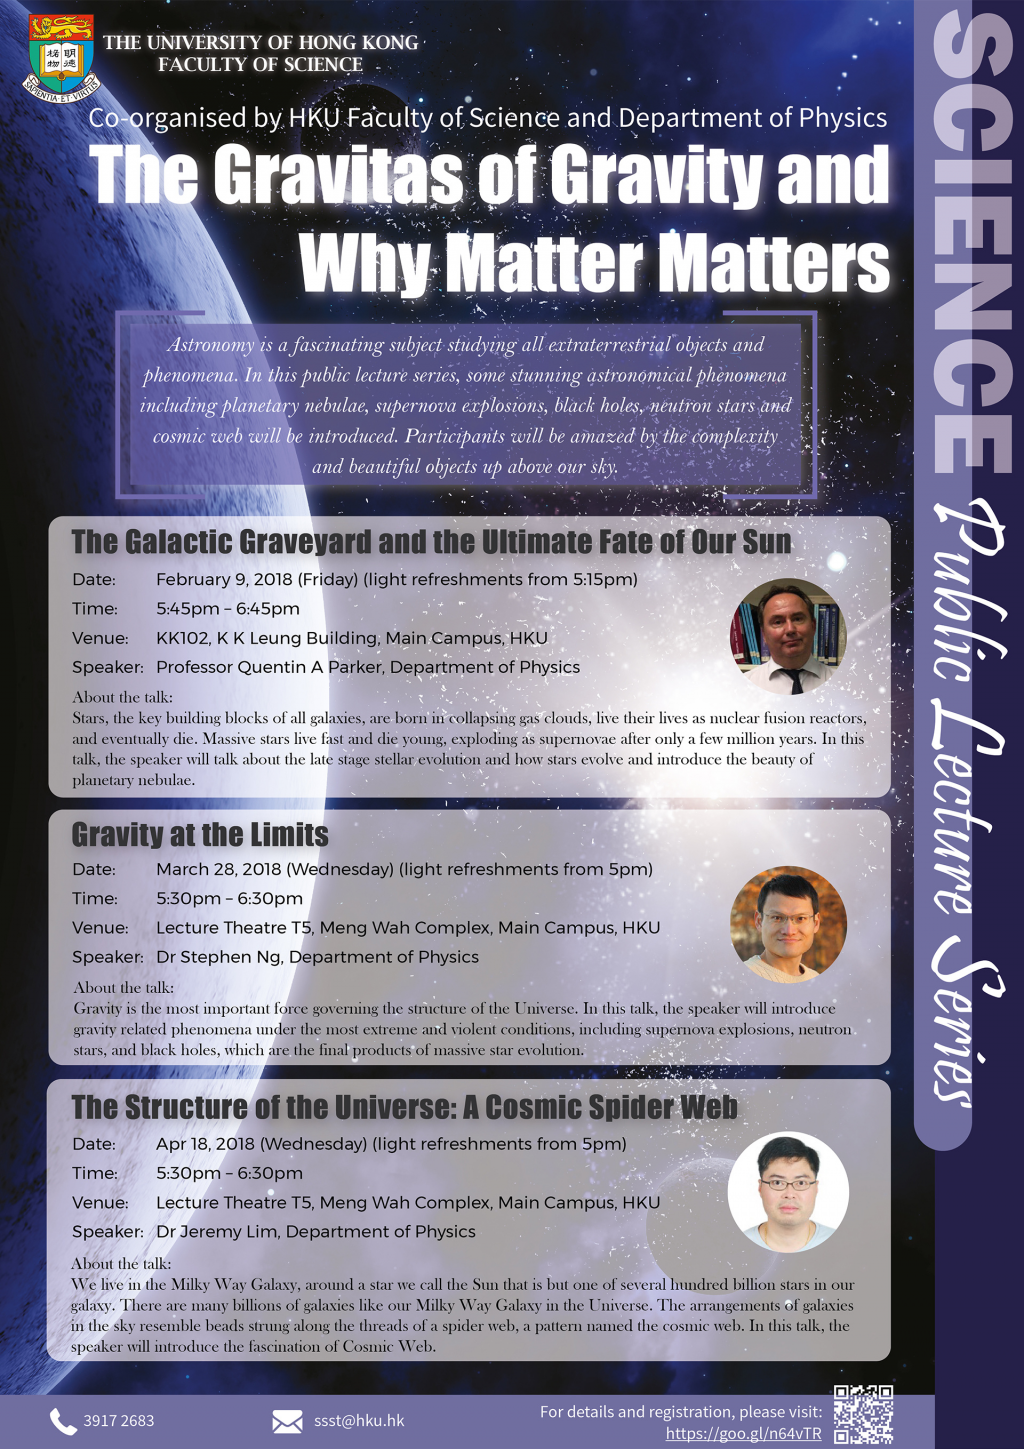 Public Lecture: The Structure of the Universe: A Cosmic Spider Web